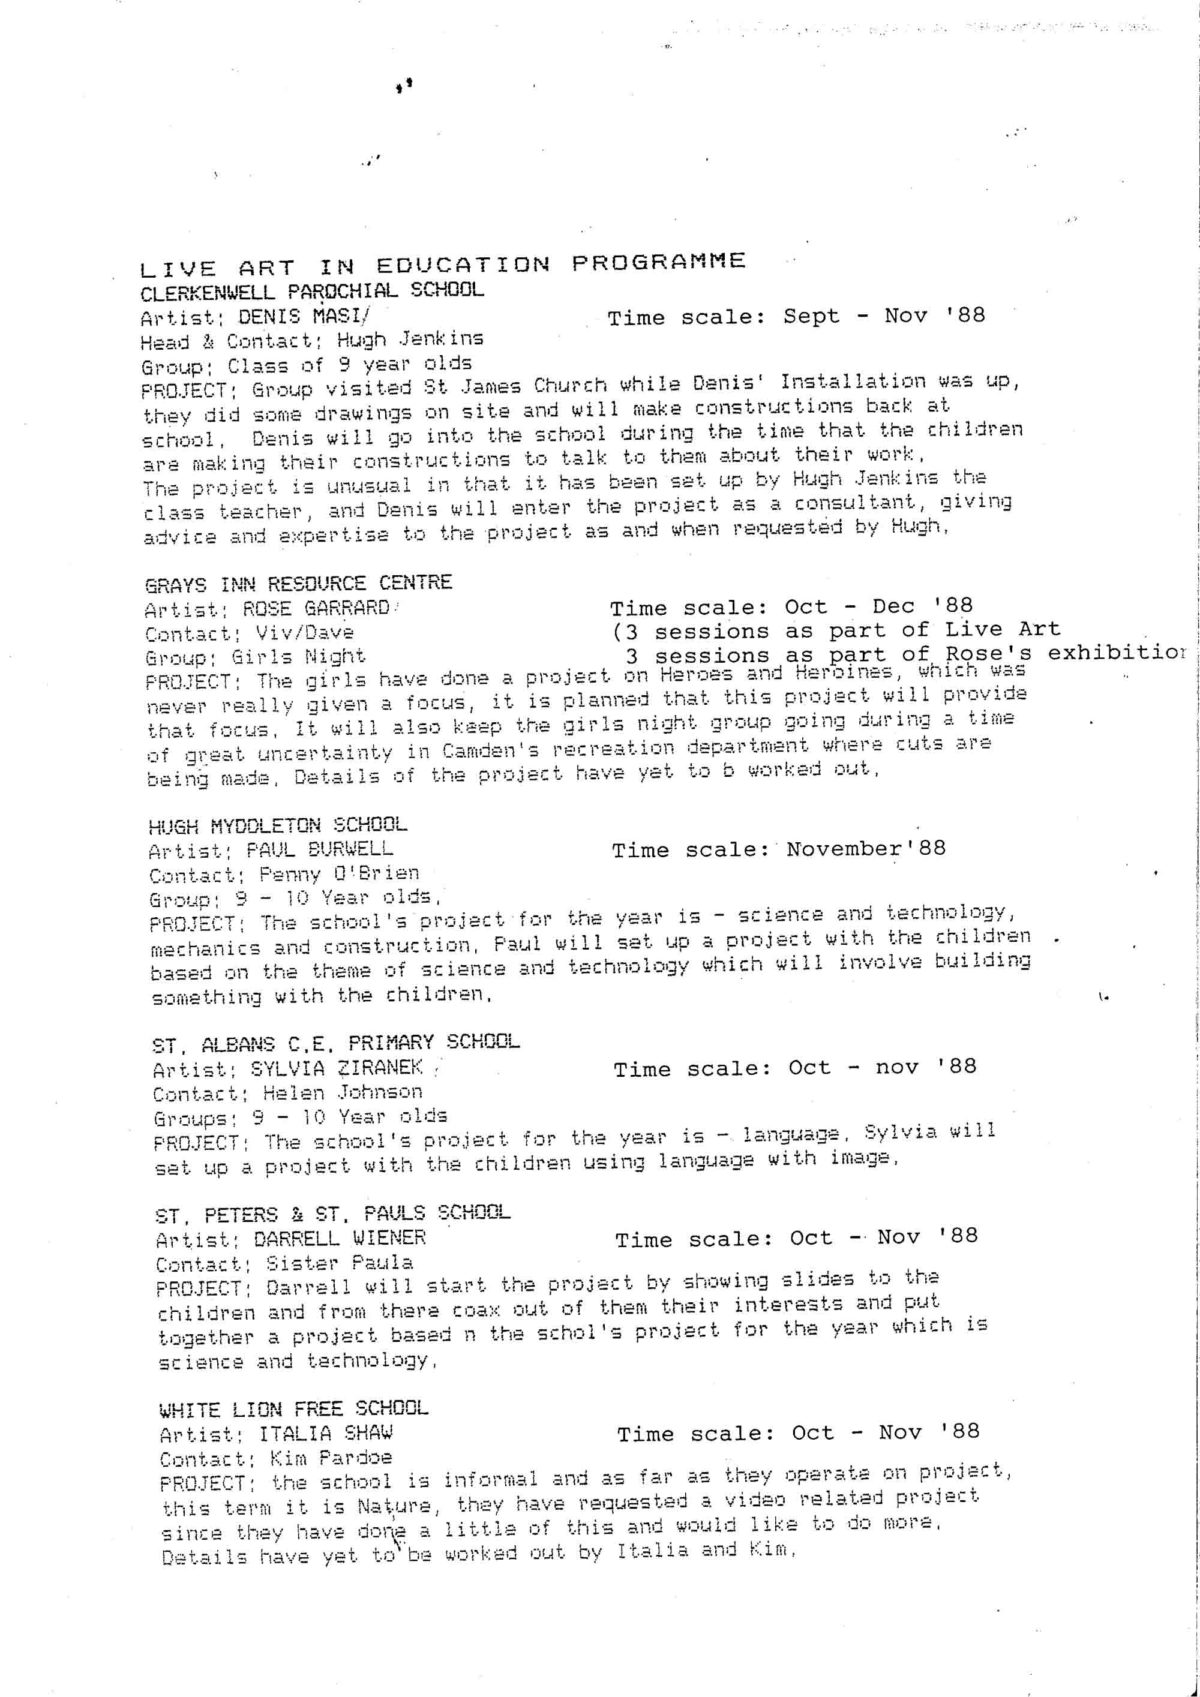 Live Art in Education programme, 1988 (Page 1 of 5)